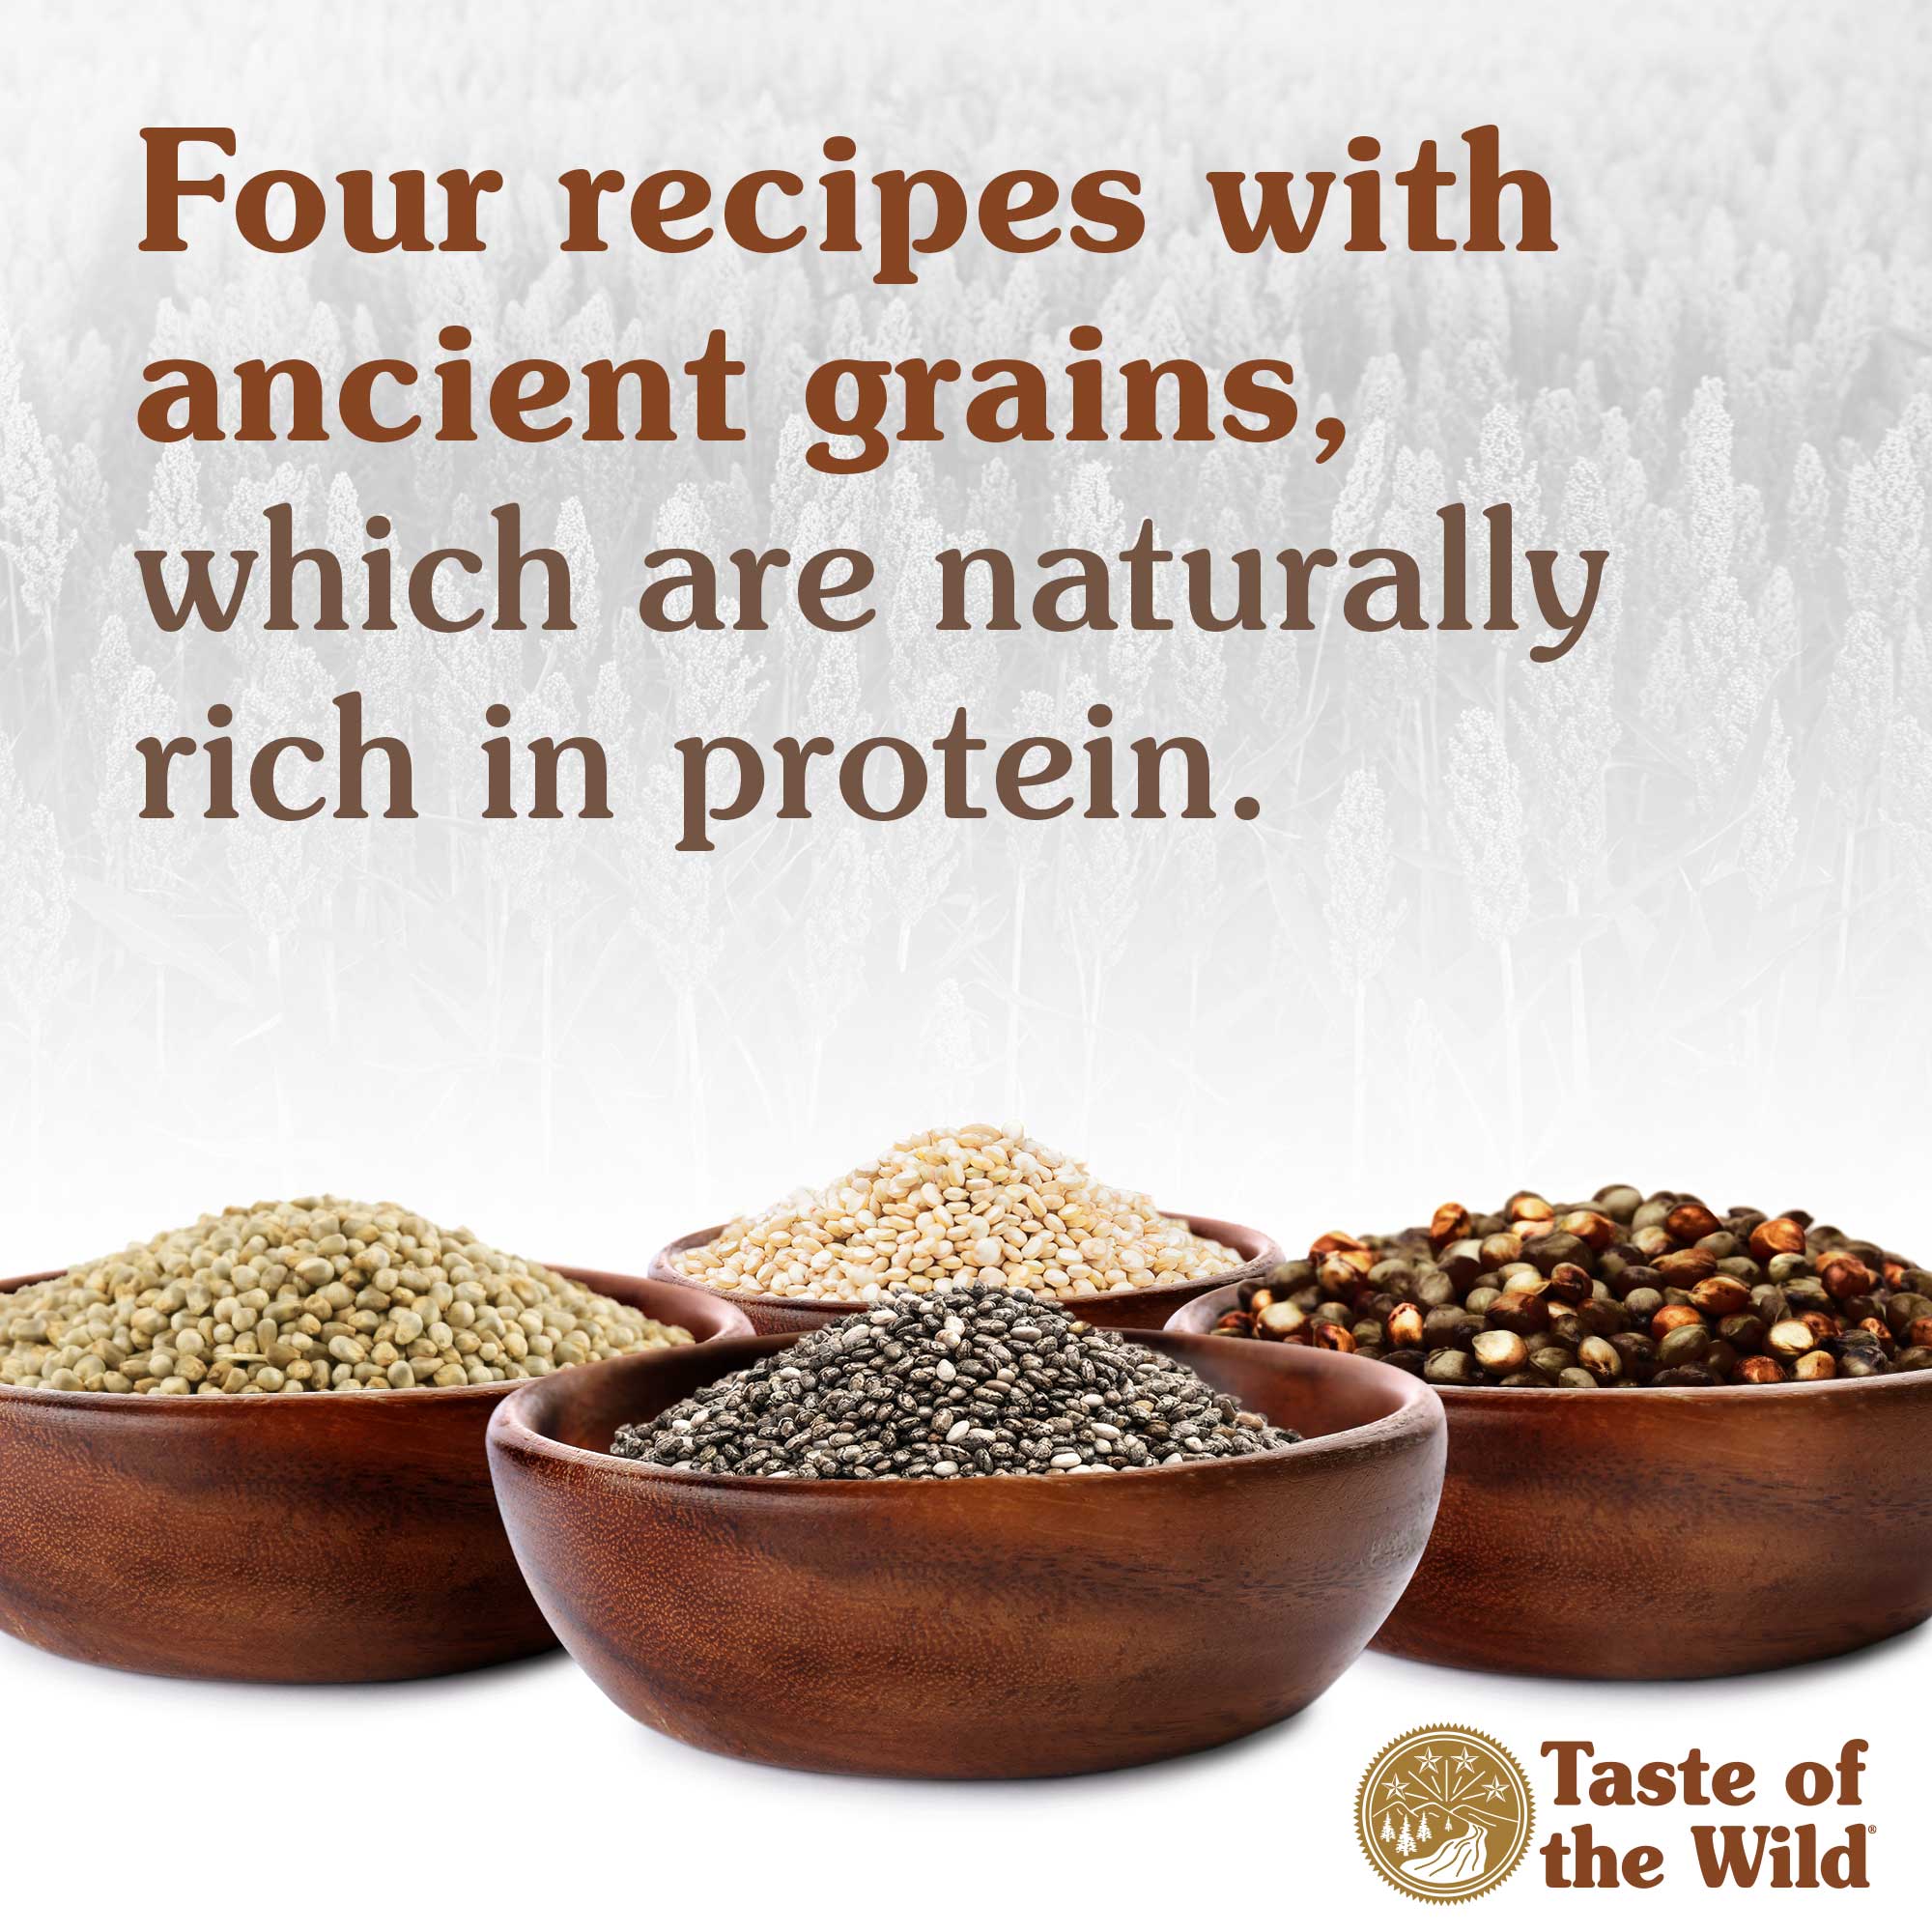 Four recipes with ancient grains, which are naturally rich in protein.